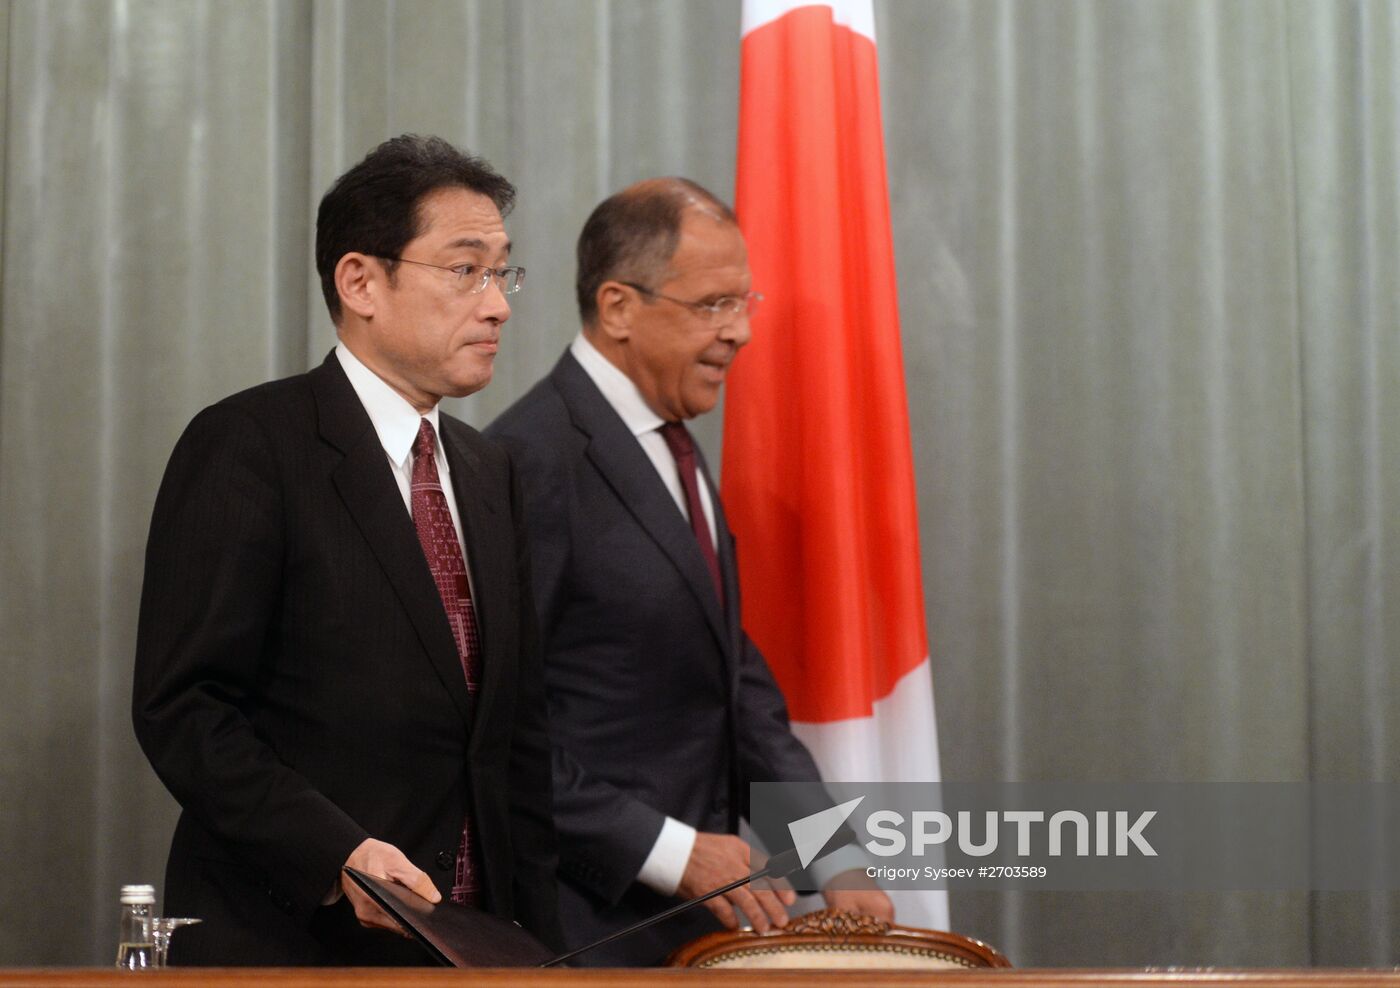 Russian Foreign Minister Sergey Lavrov meets with his Japanese counterpart Fumio Kishida